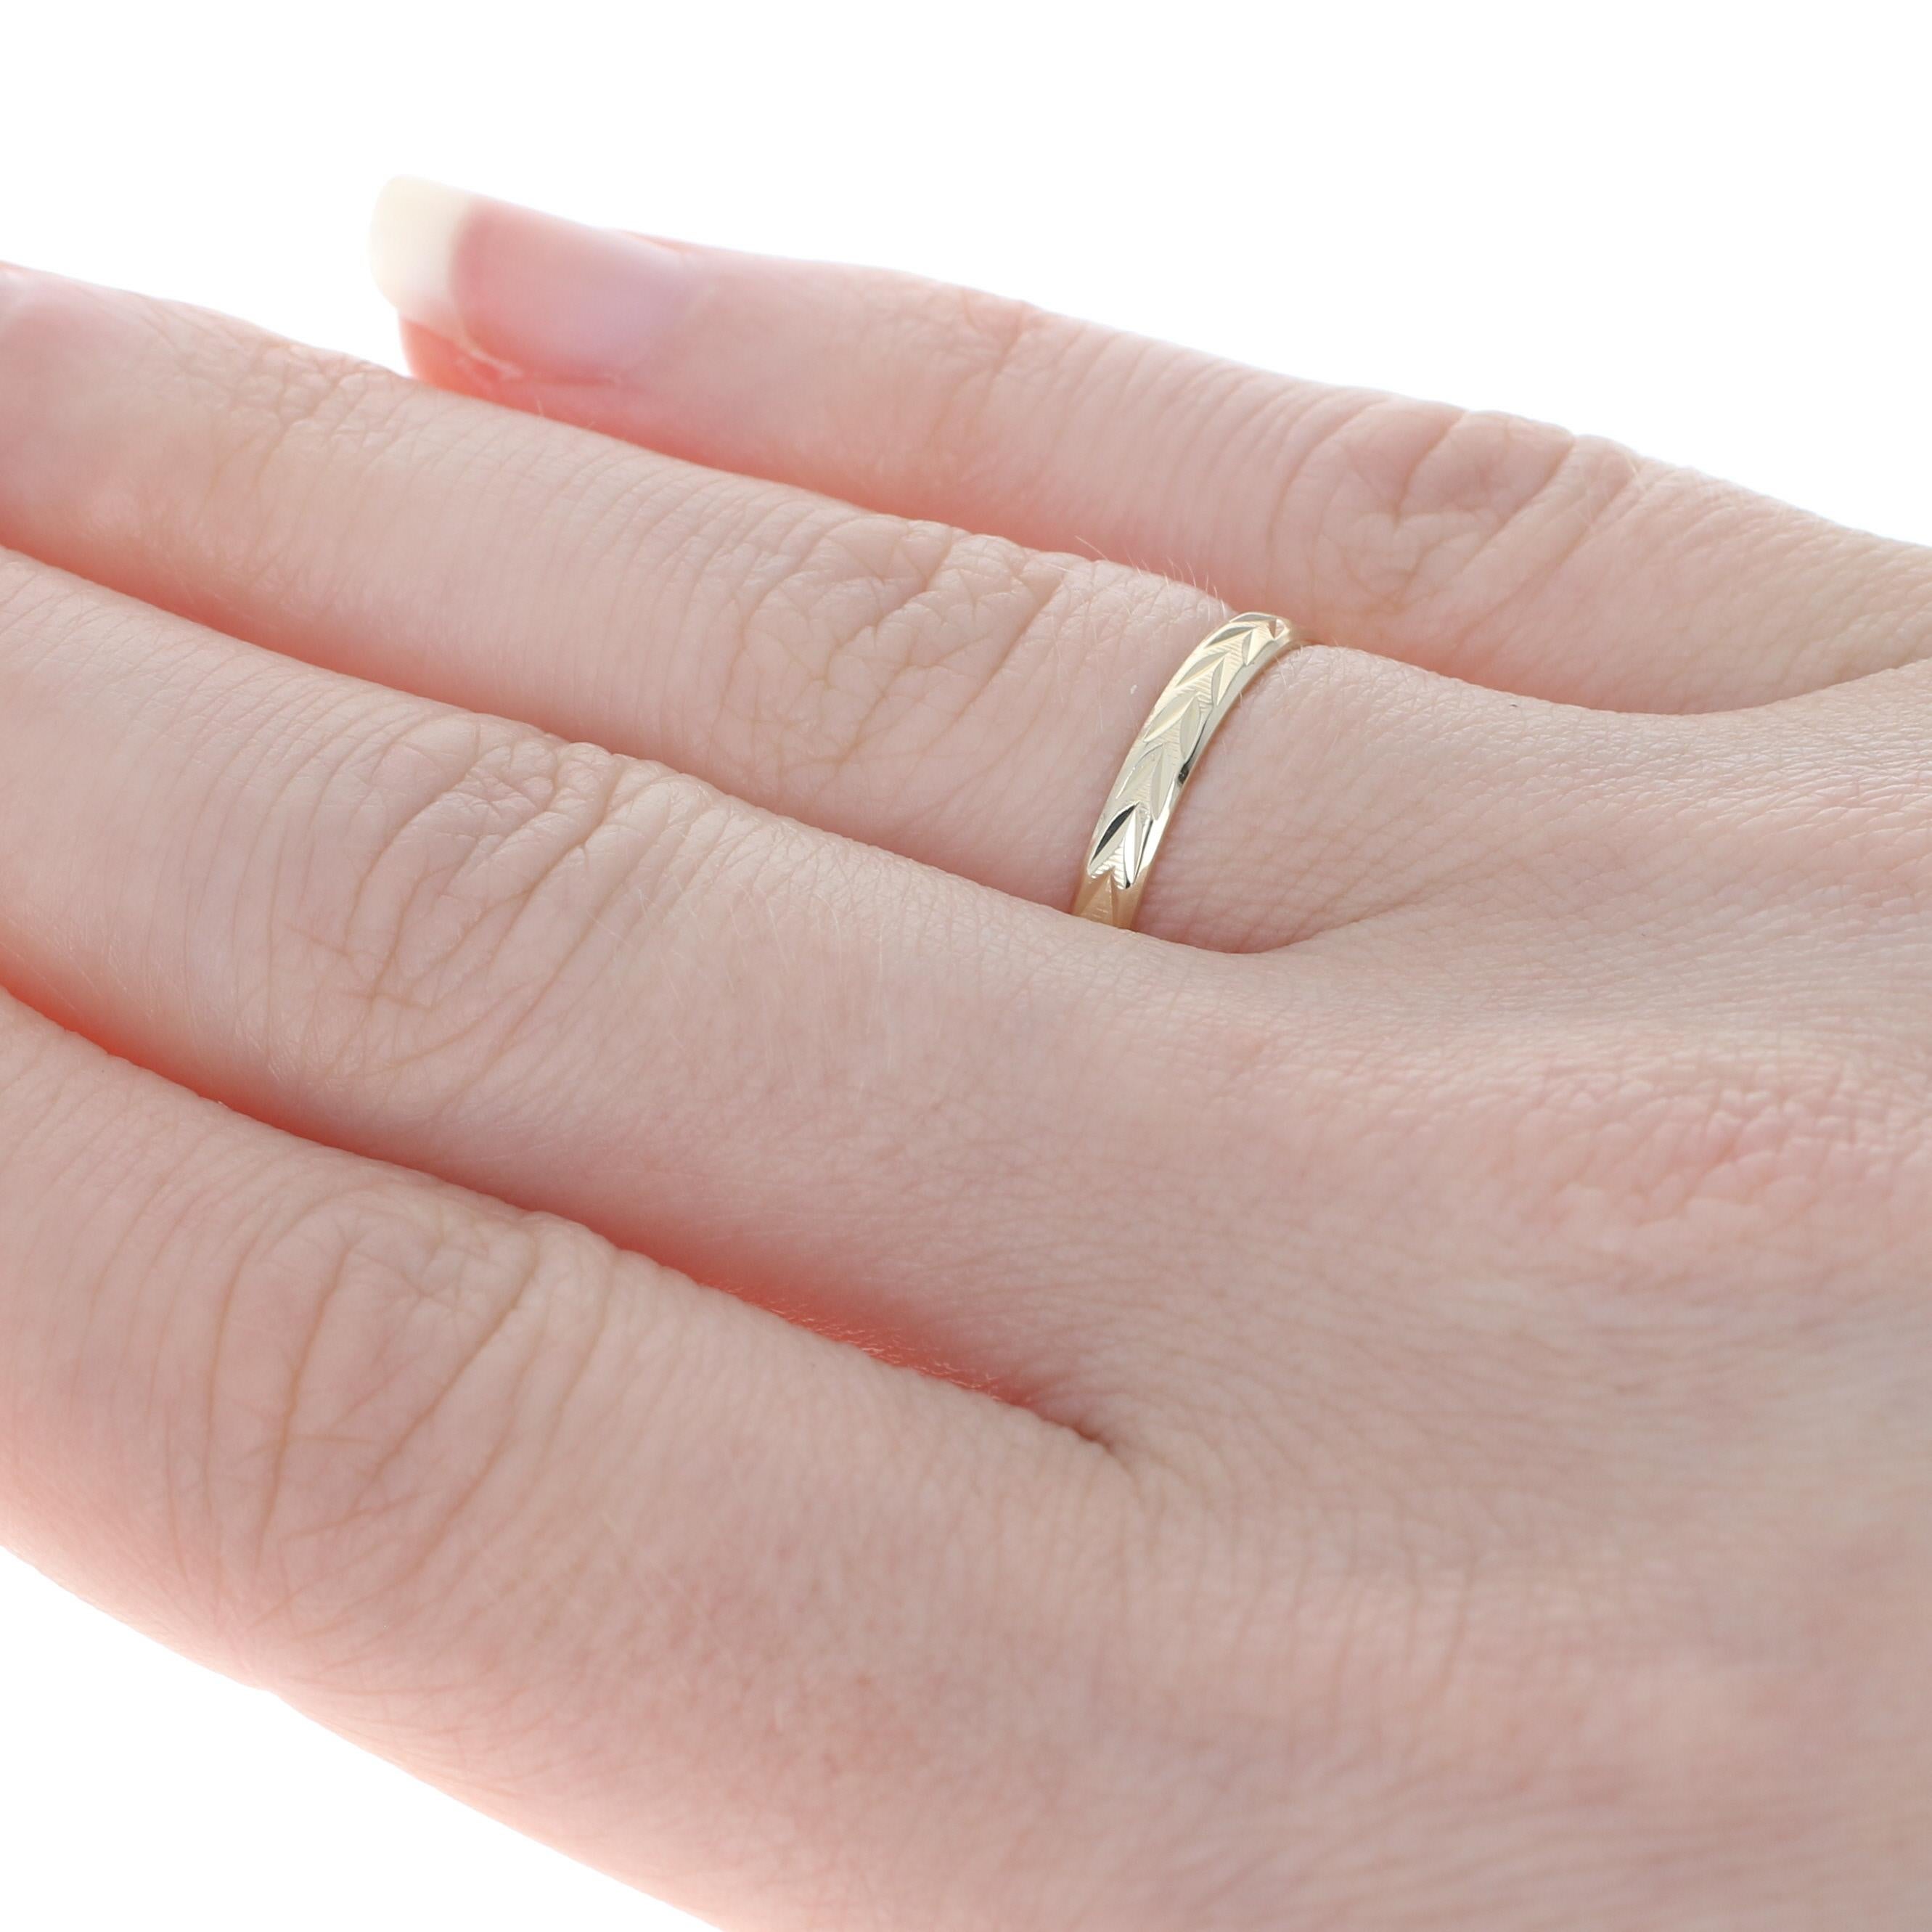 Women's or Men's Milor Etched Chevron Stackable Band Yellow Gold, 14k Wedding Ring